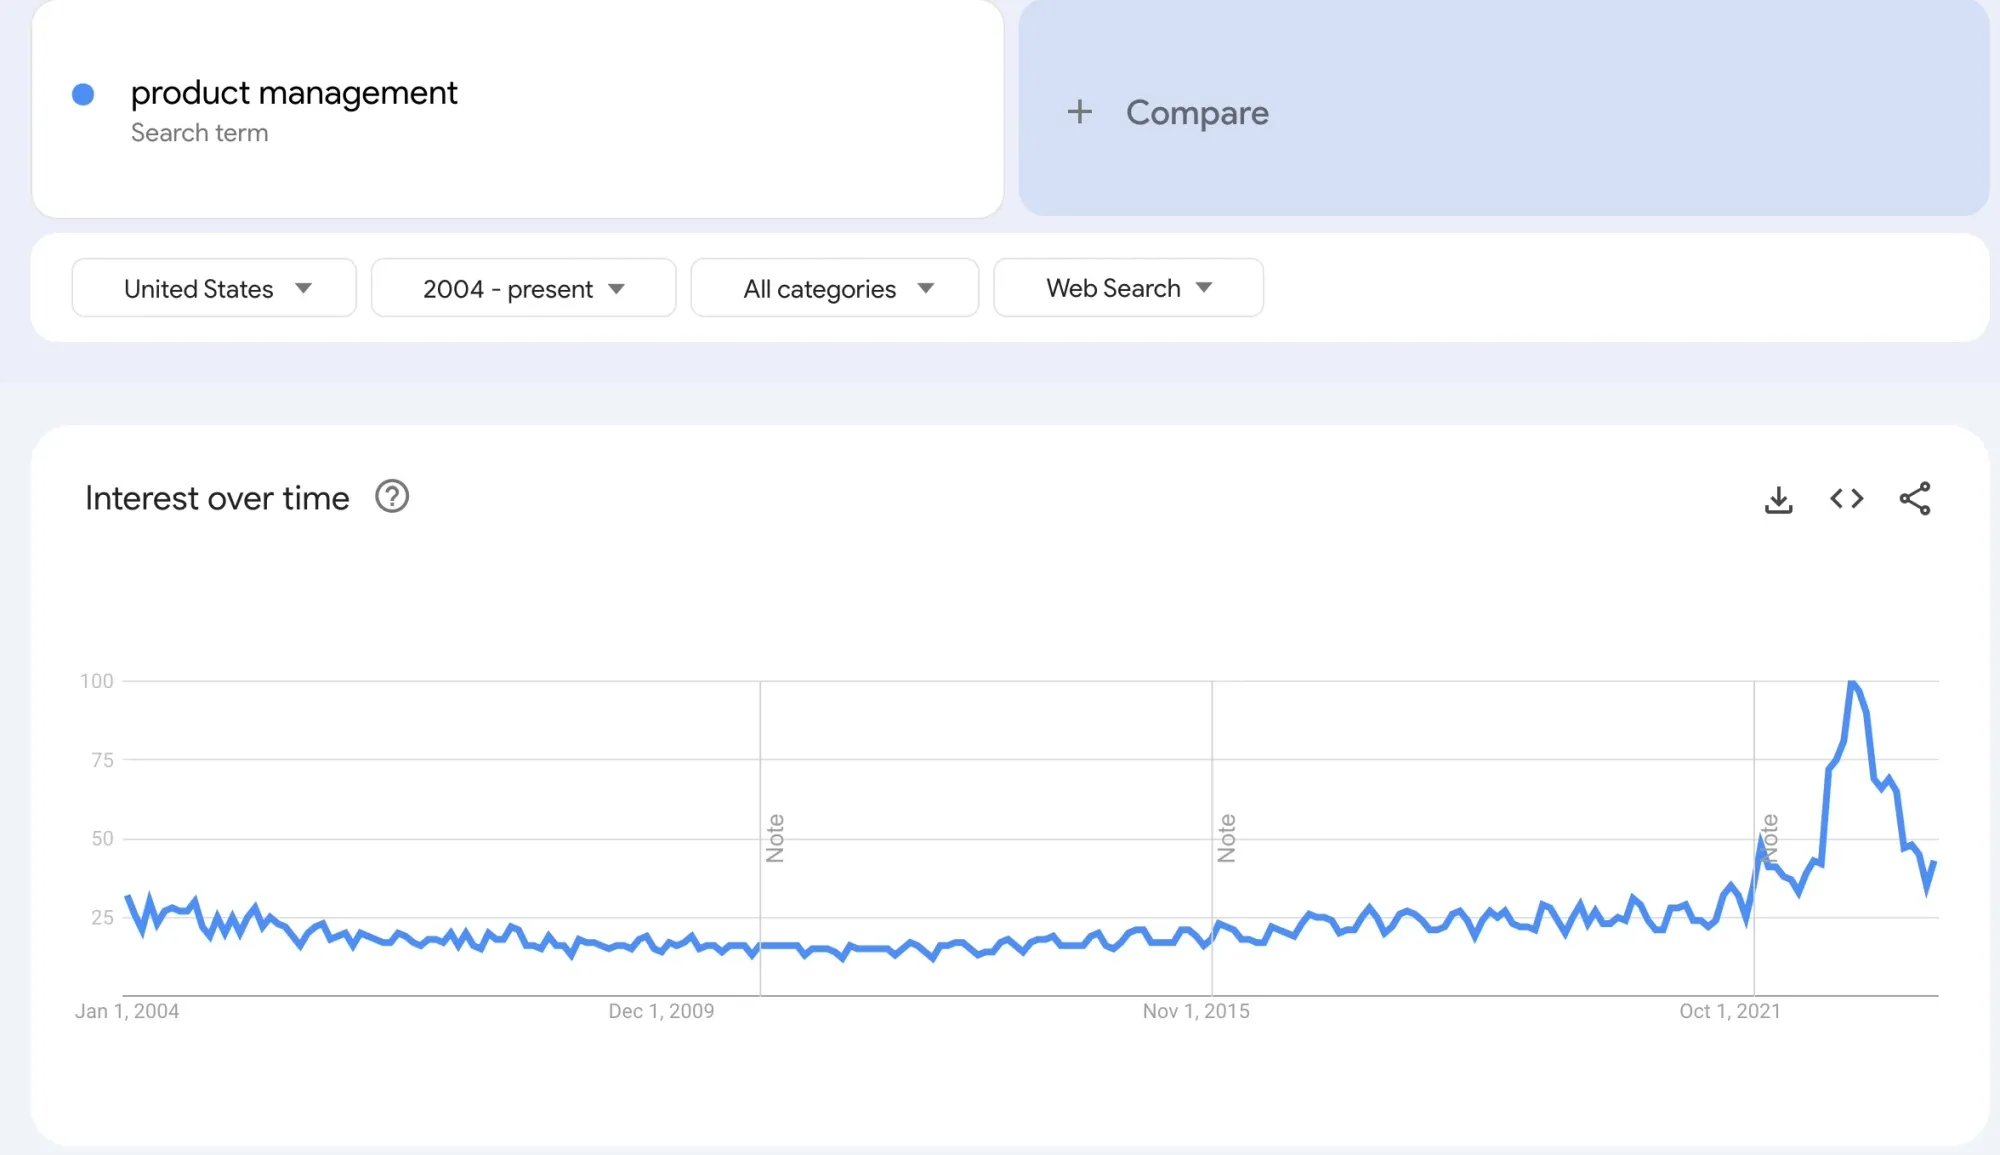 Product management search interest over time